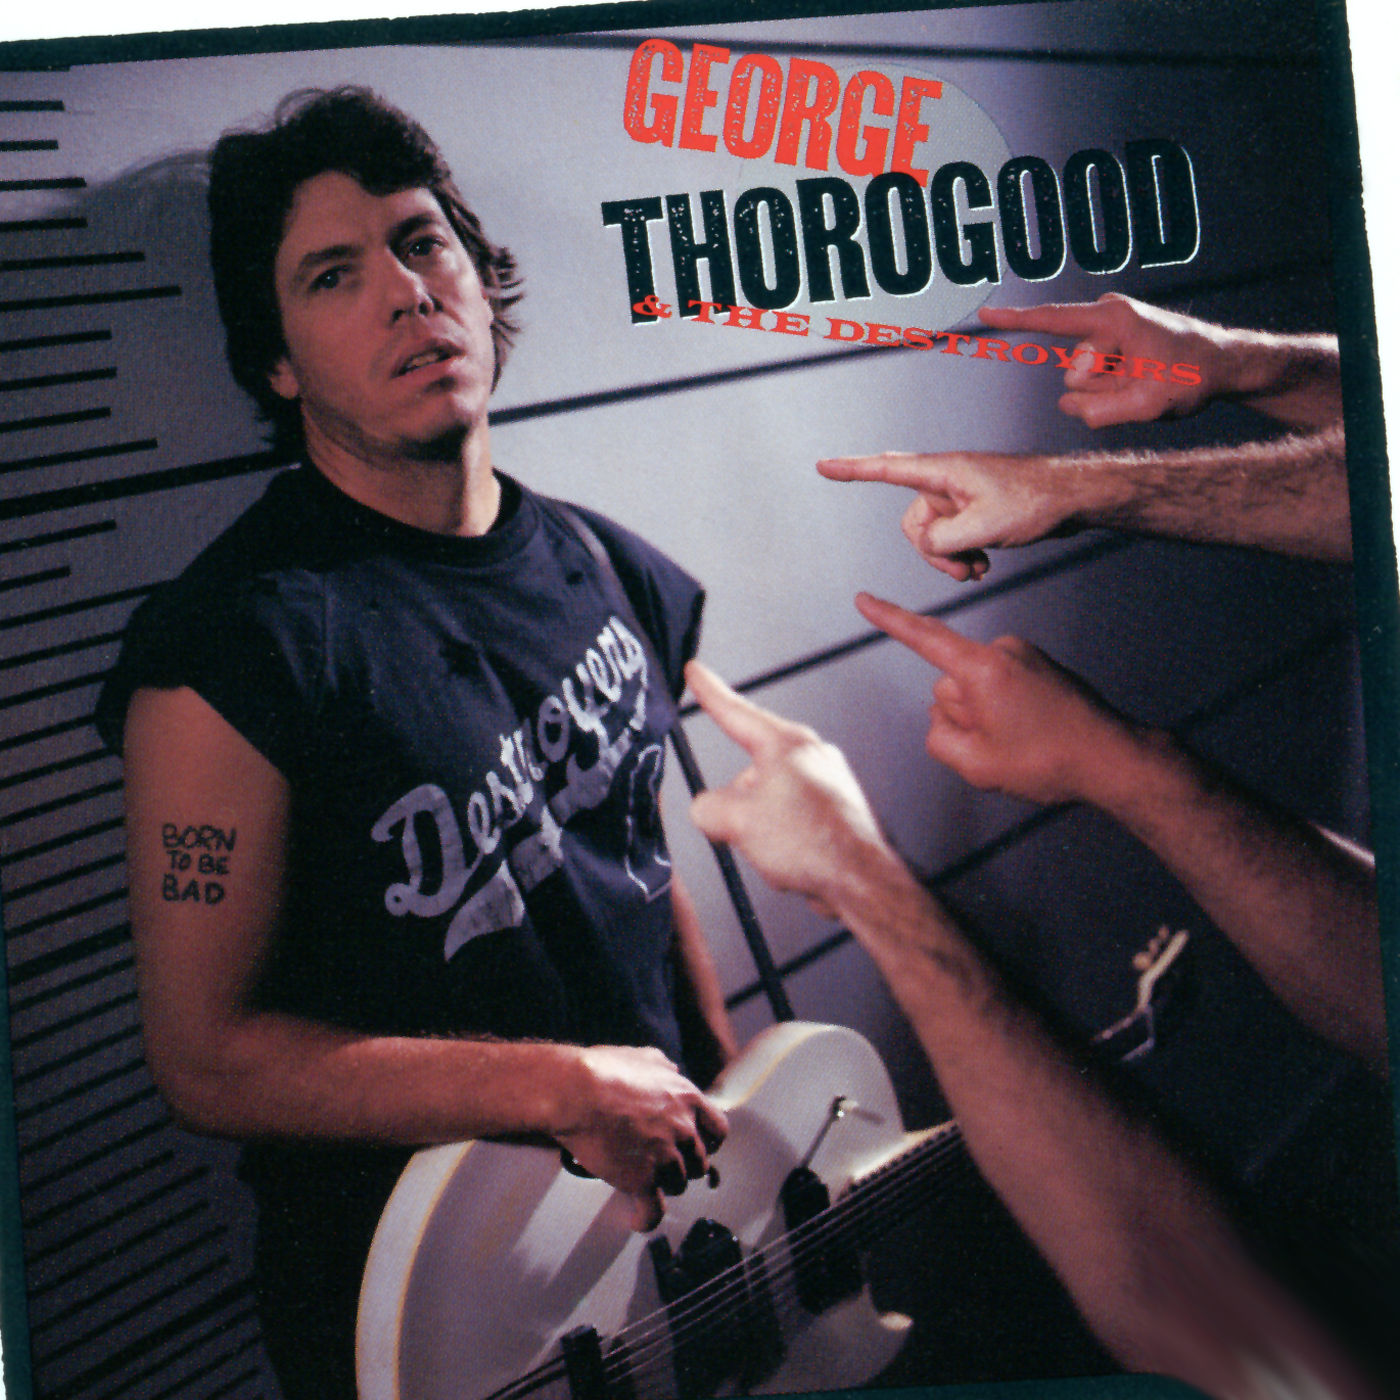 George Thorogood & The Destroyers – Born To Be Bad (1988/2021) [FLAC 24bit/192kHz]